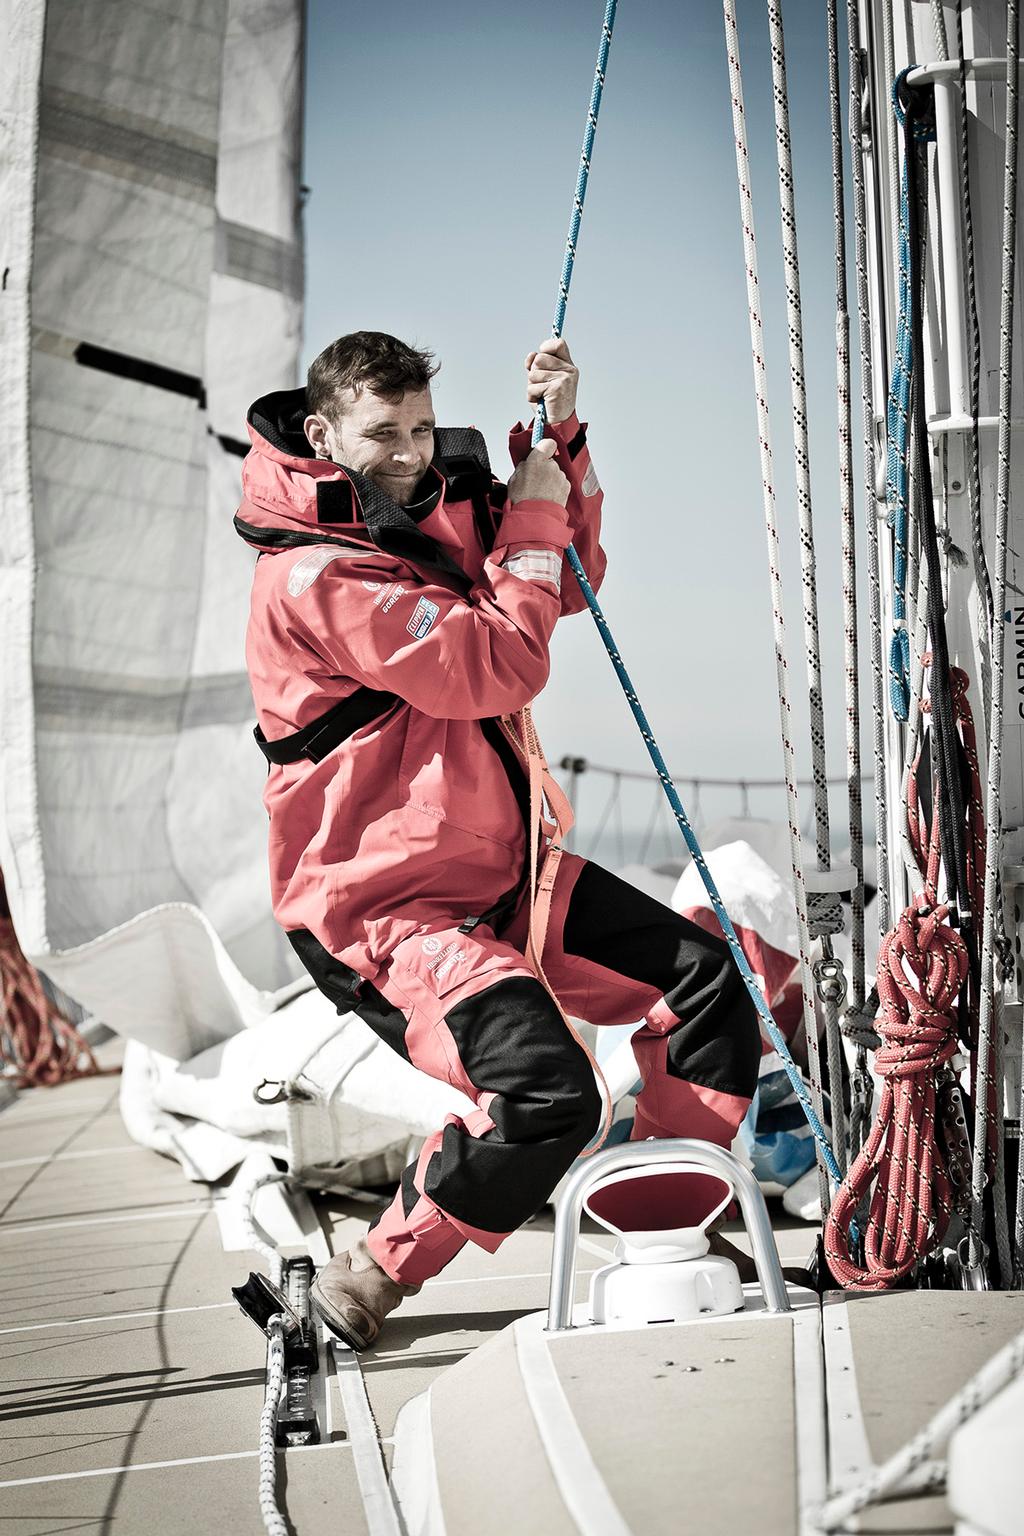 Clipper 2017-18 Race skipper Gaëtan Thomas photo copyright Clipper Round The World Yacht Race http://www.clipperroundtheworld.com taken at  and featuring the  class